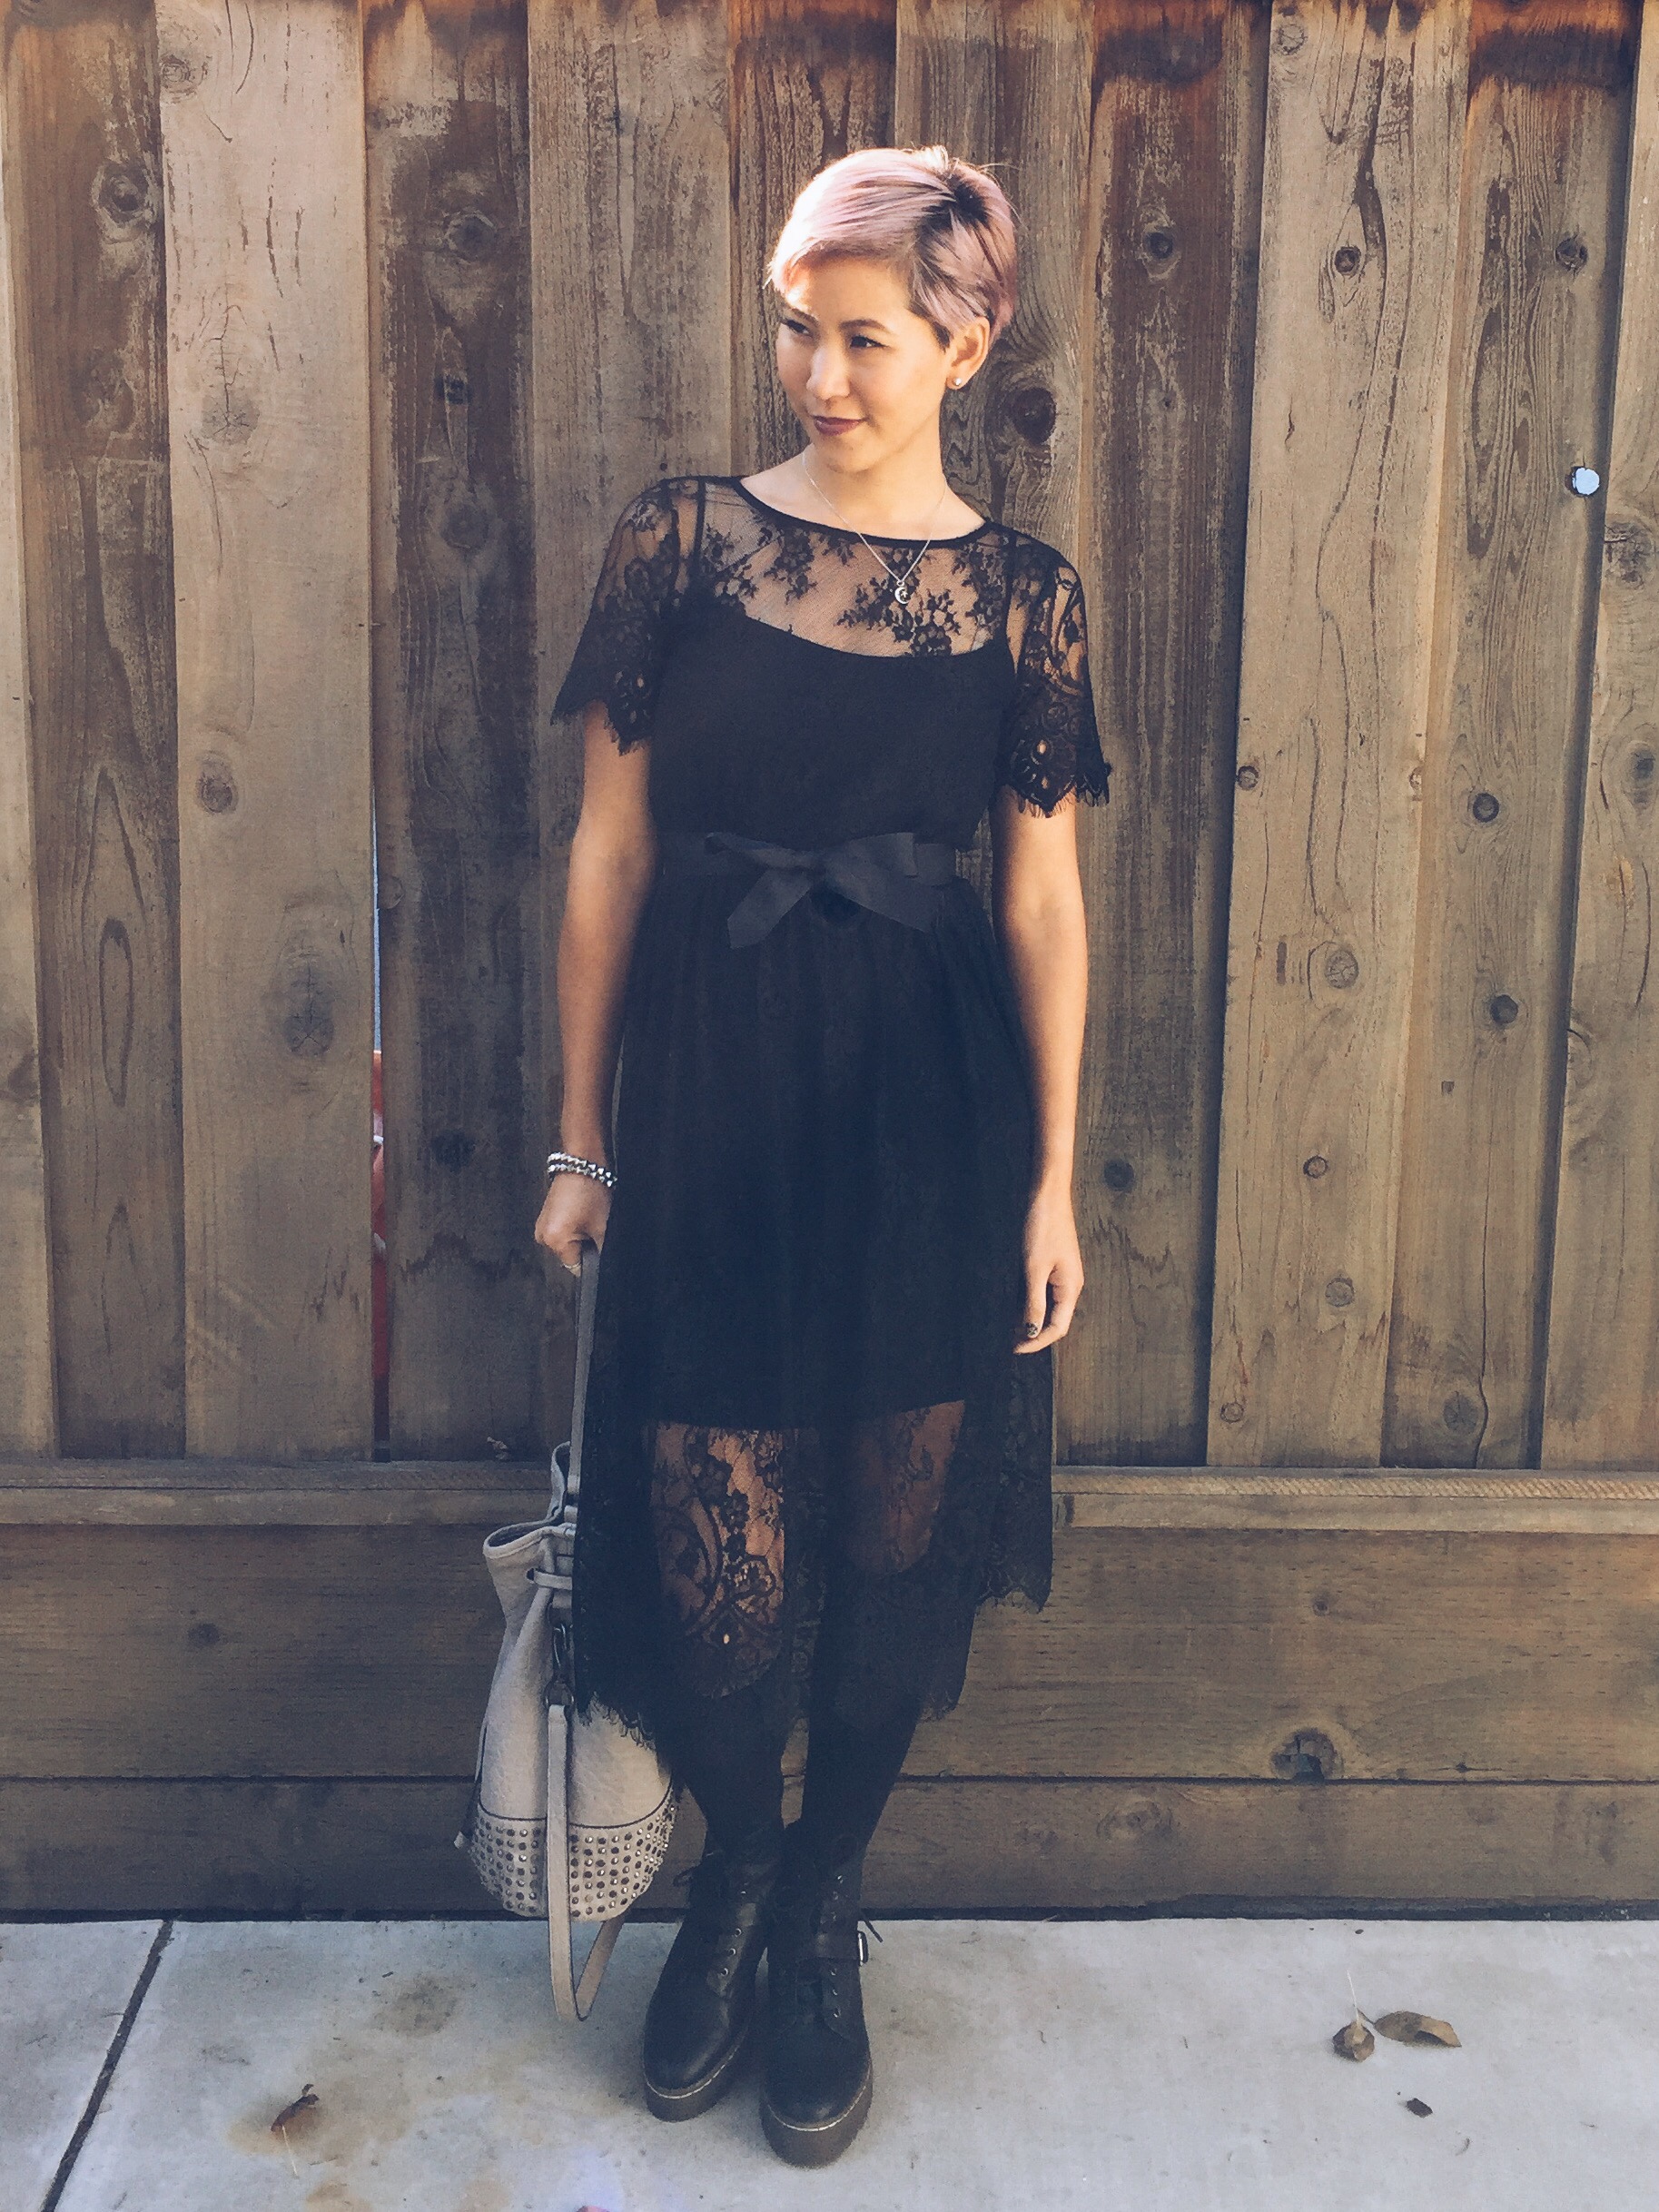 Black Lace Dress with Boots